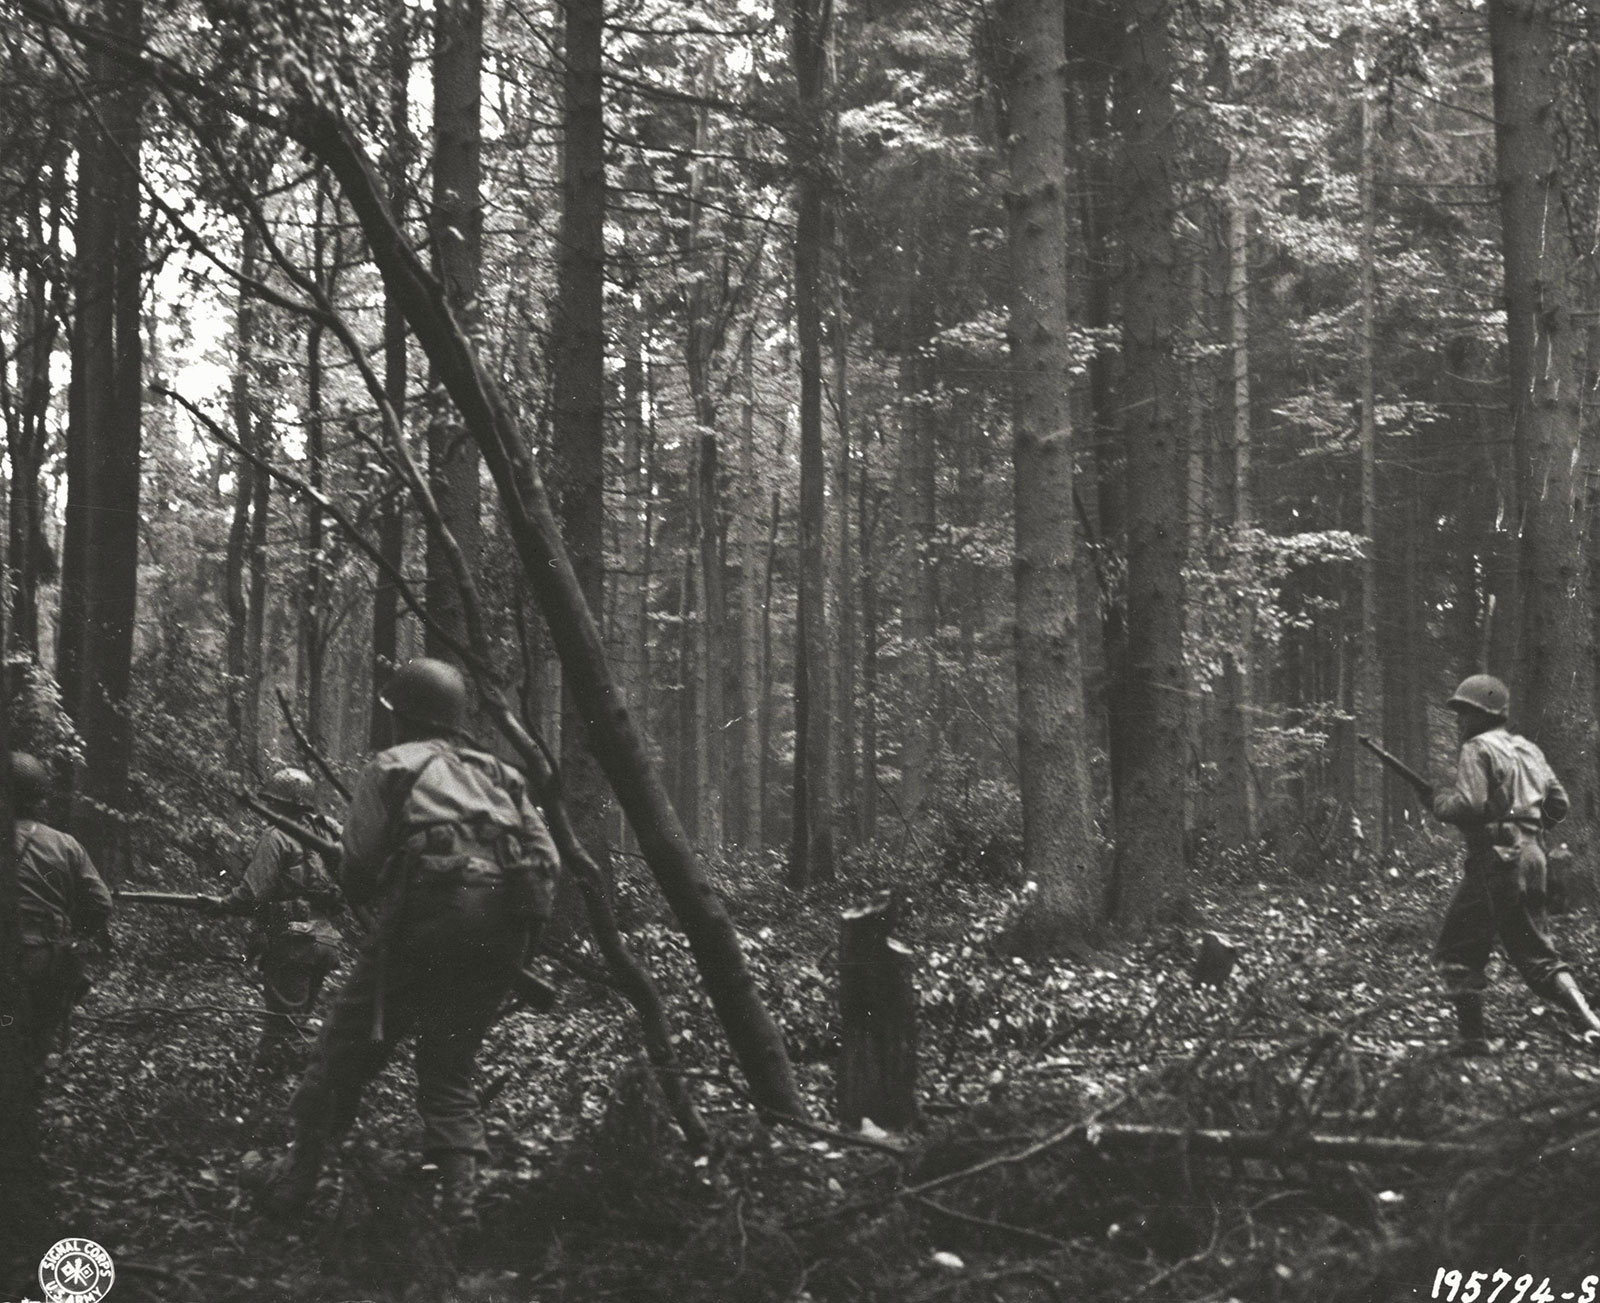 "Infantrymen Pushing through the Hurtgen Forest in Germany." 1944.